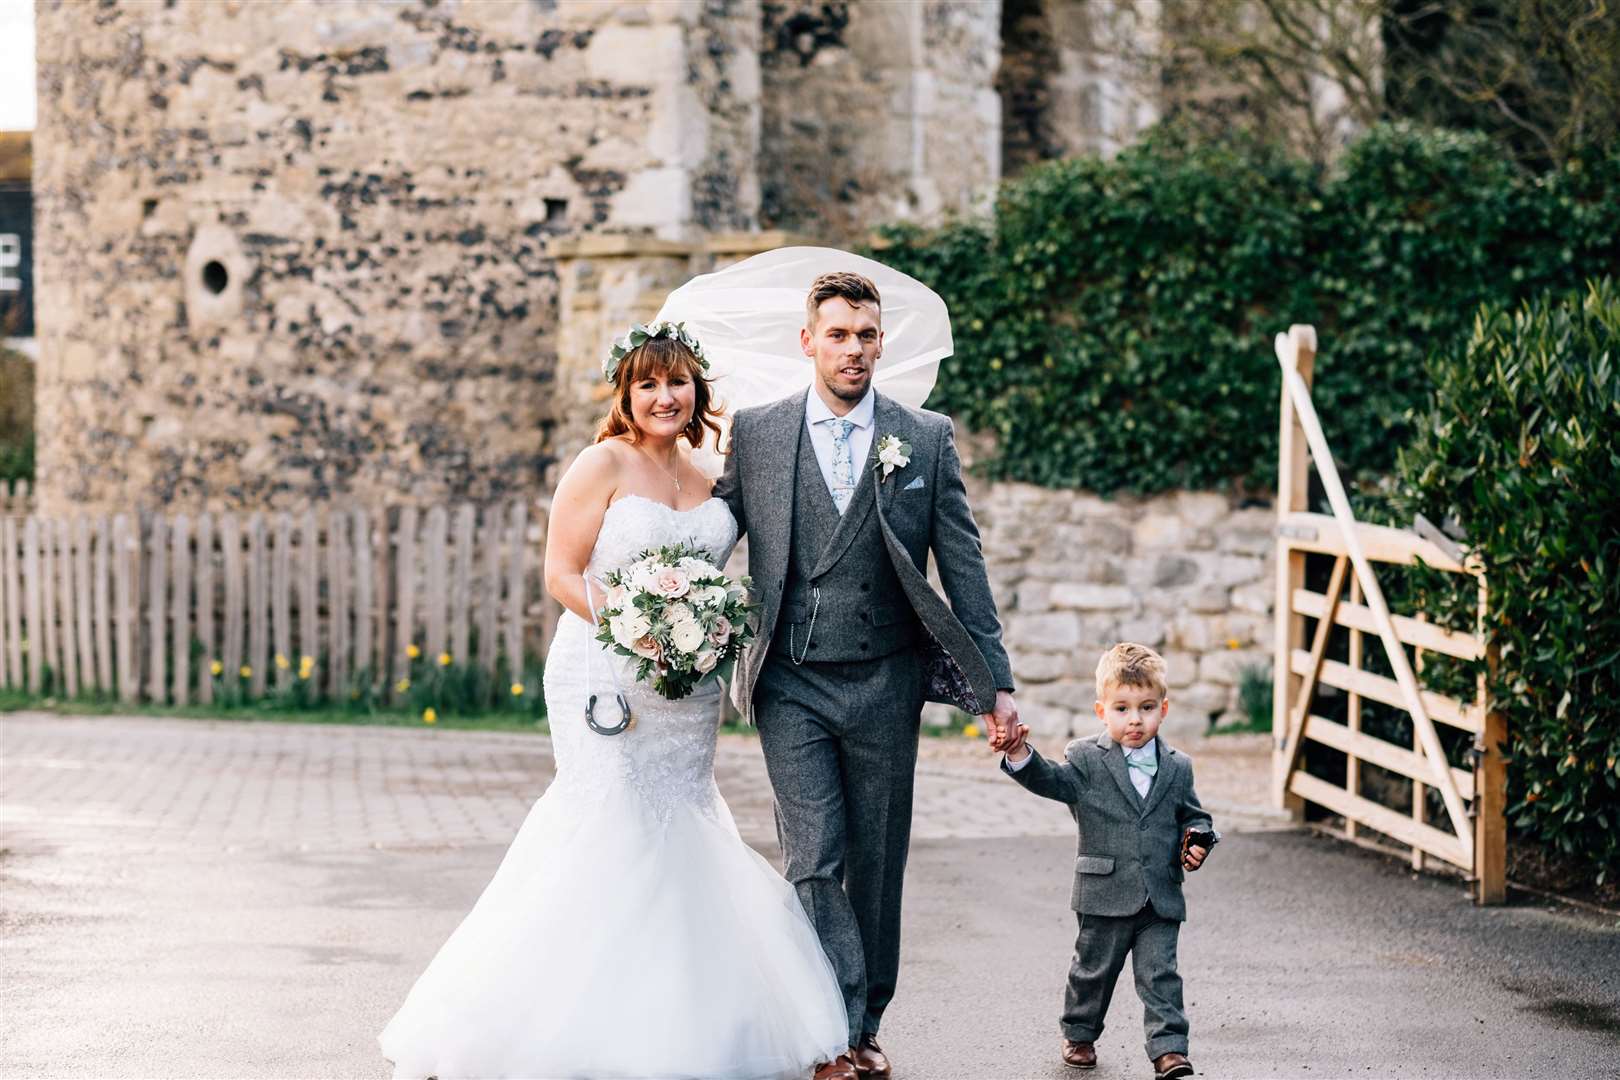 Scott and Adele Richards on their wedding day with son Oscar. Picture: James Eldridge Photography/SWNS